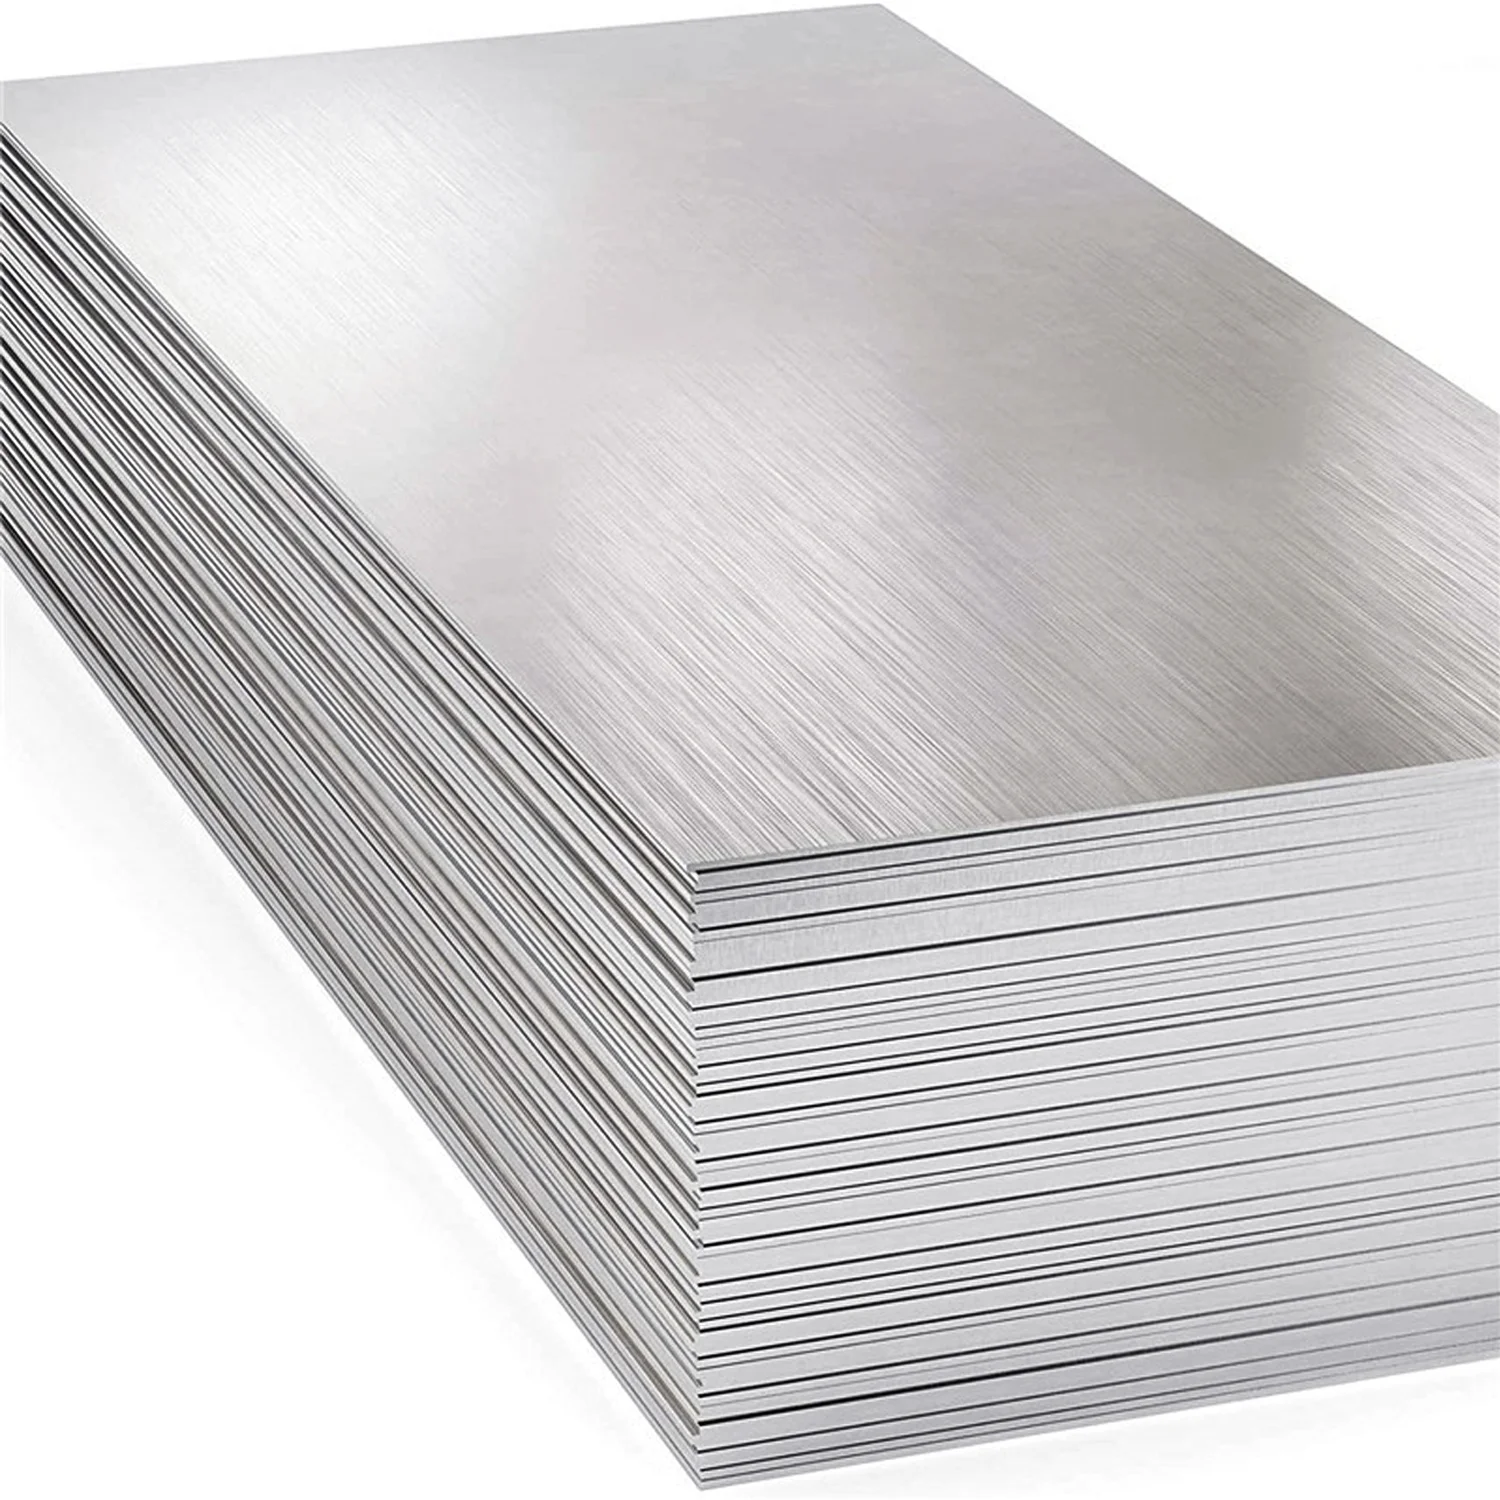 0.6 mm thick /440c 0.5mm Stainless Steel Plate/Sheet Hot/Cold Rolled and Mirror Stainless Steel Sheet